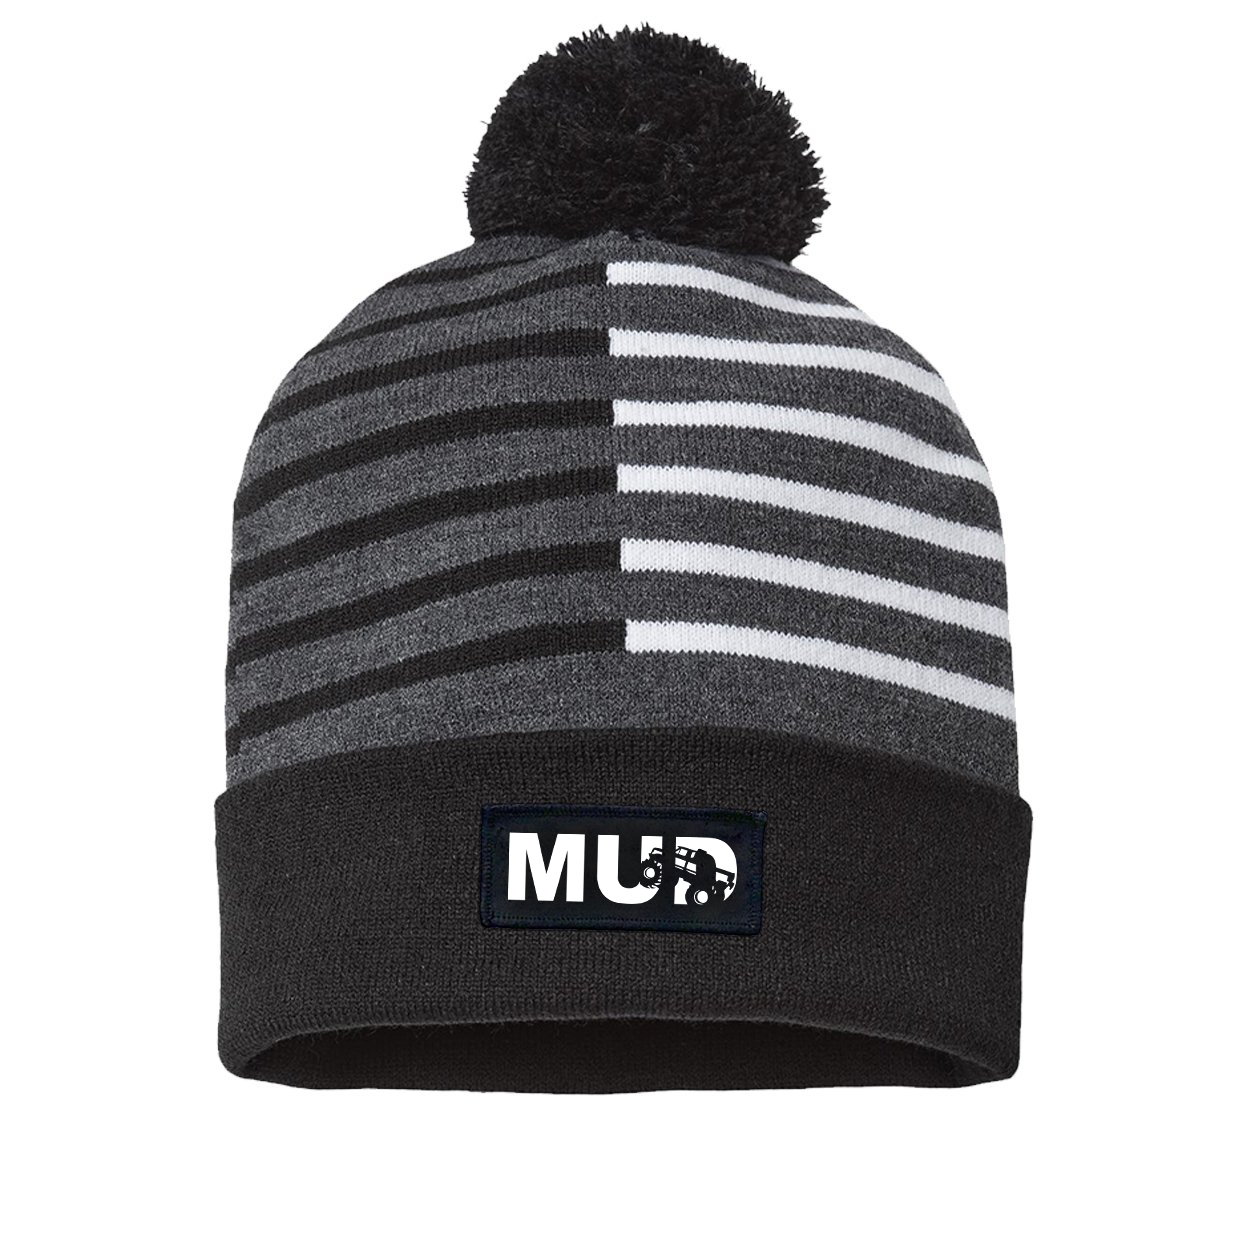 Mud Truck Logo Night Out Woven Patch Roll Up Pom Knit Beanie Half Color Black/White (White Logo)